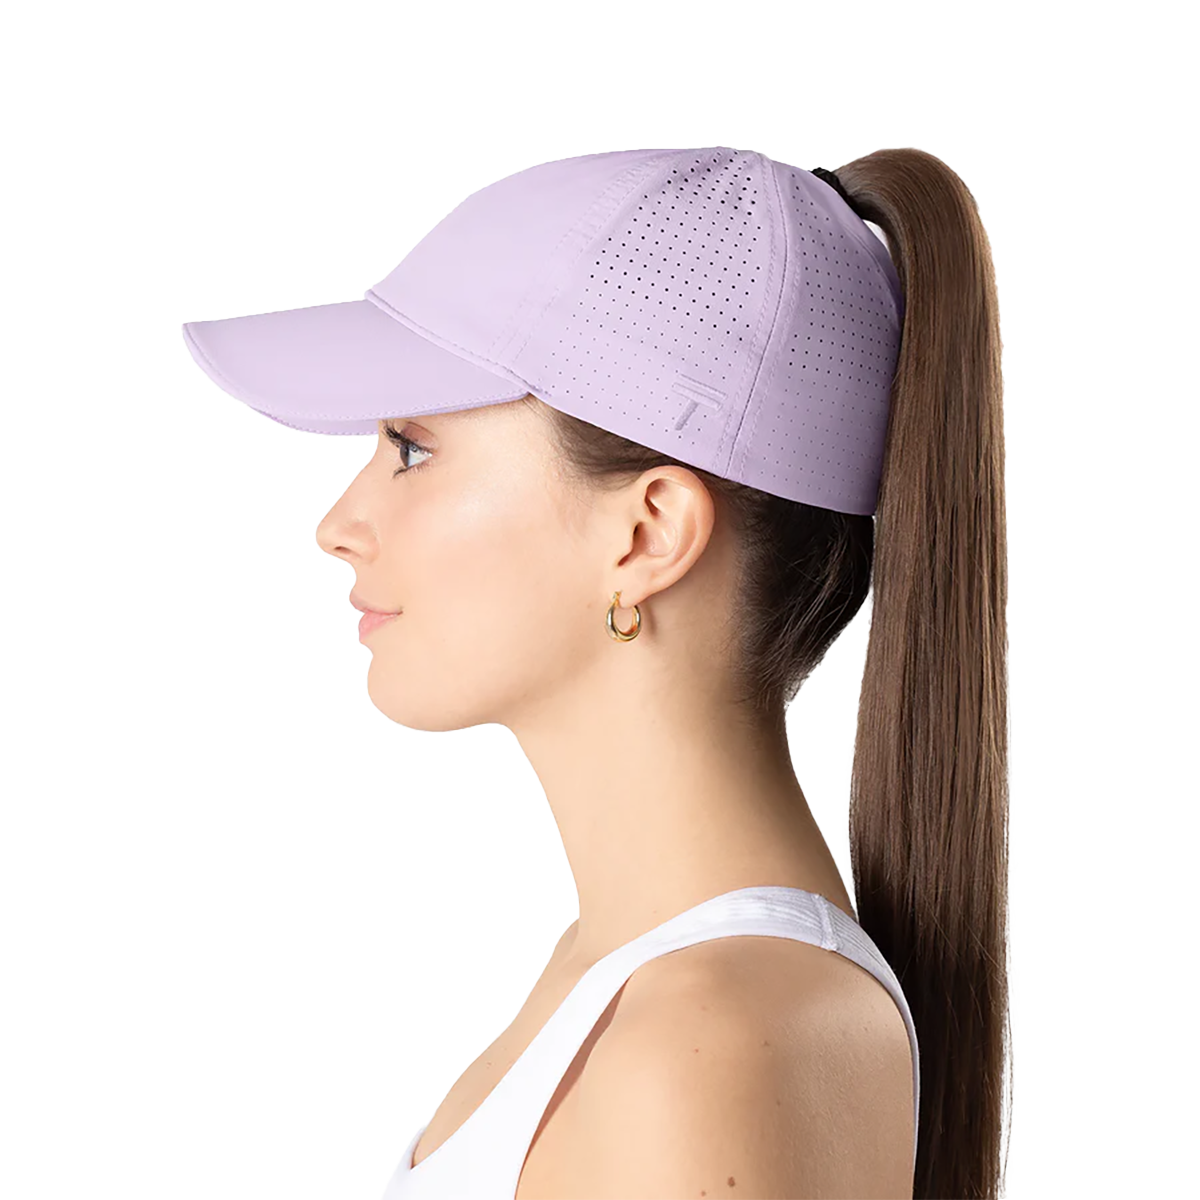 Top Knot Performance Light Hat, , large image number null